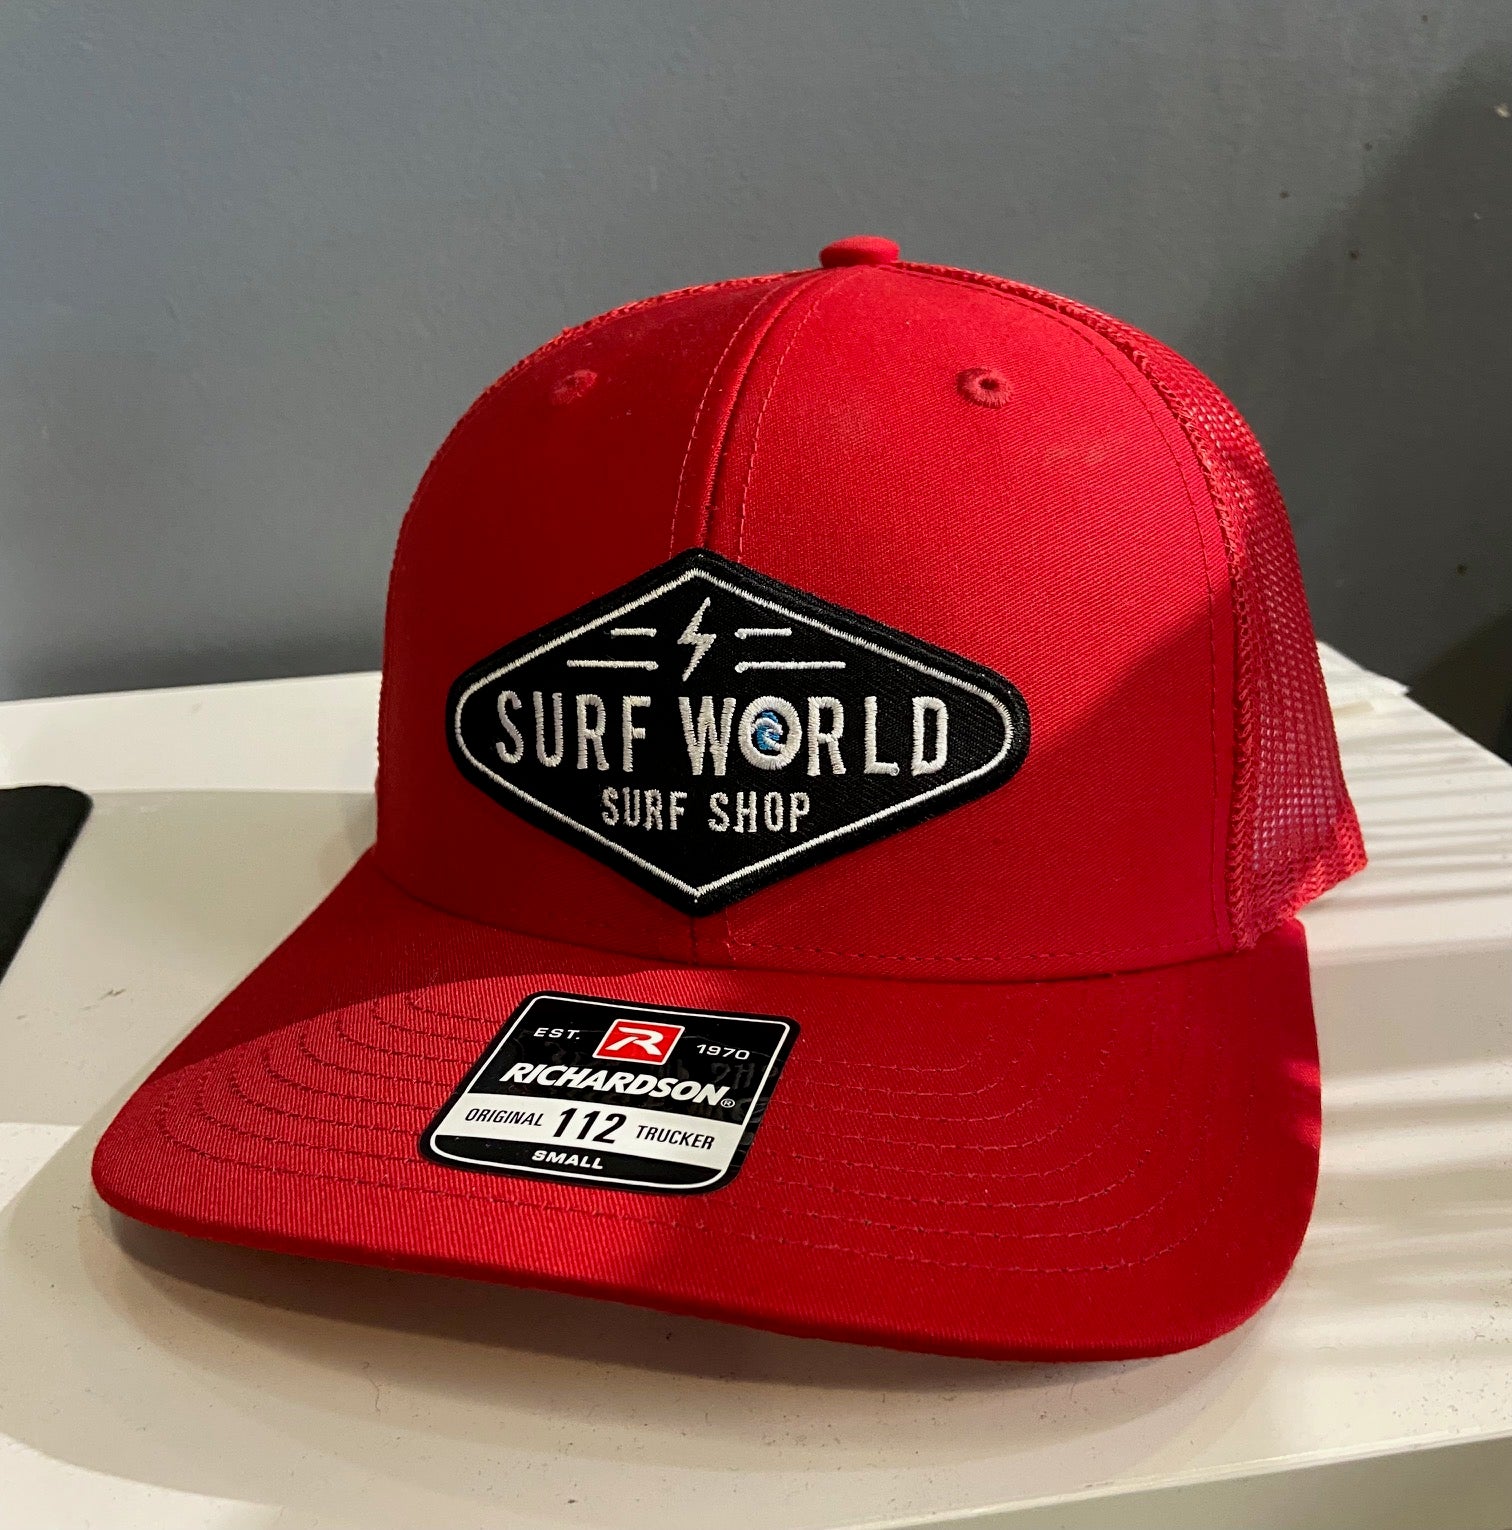 Surf World Retro Trucker Hat - Boltz- Multiple colors Mens Hat All Red Small